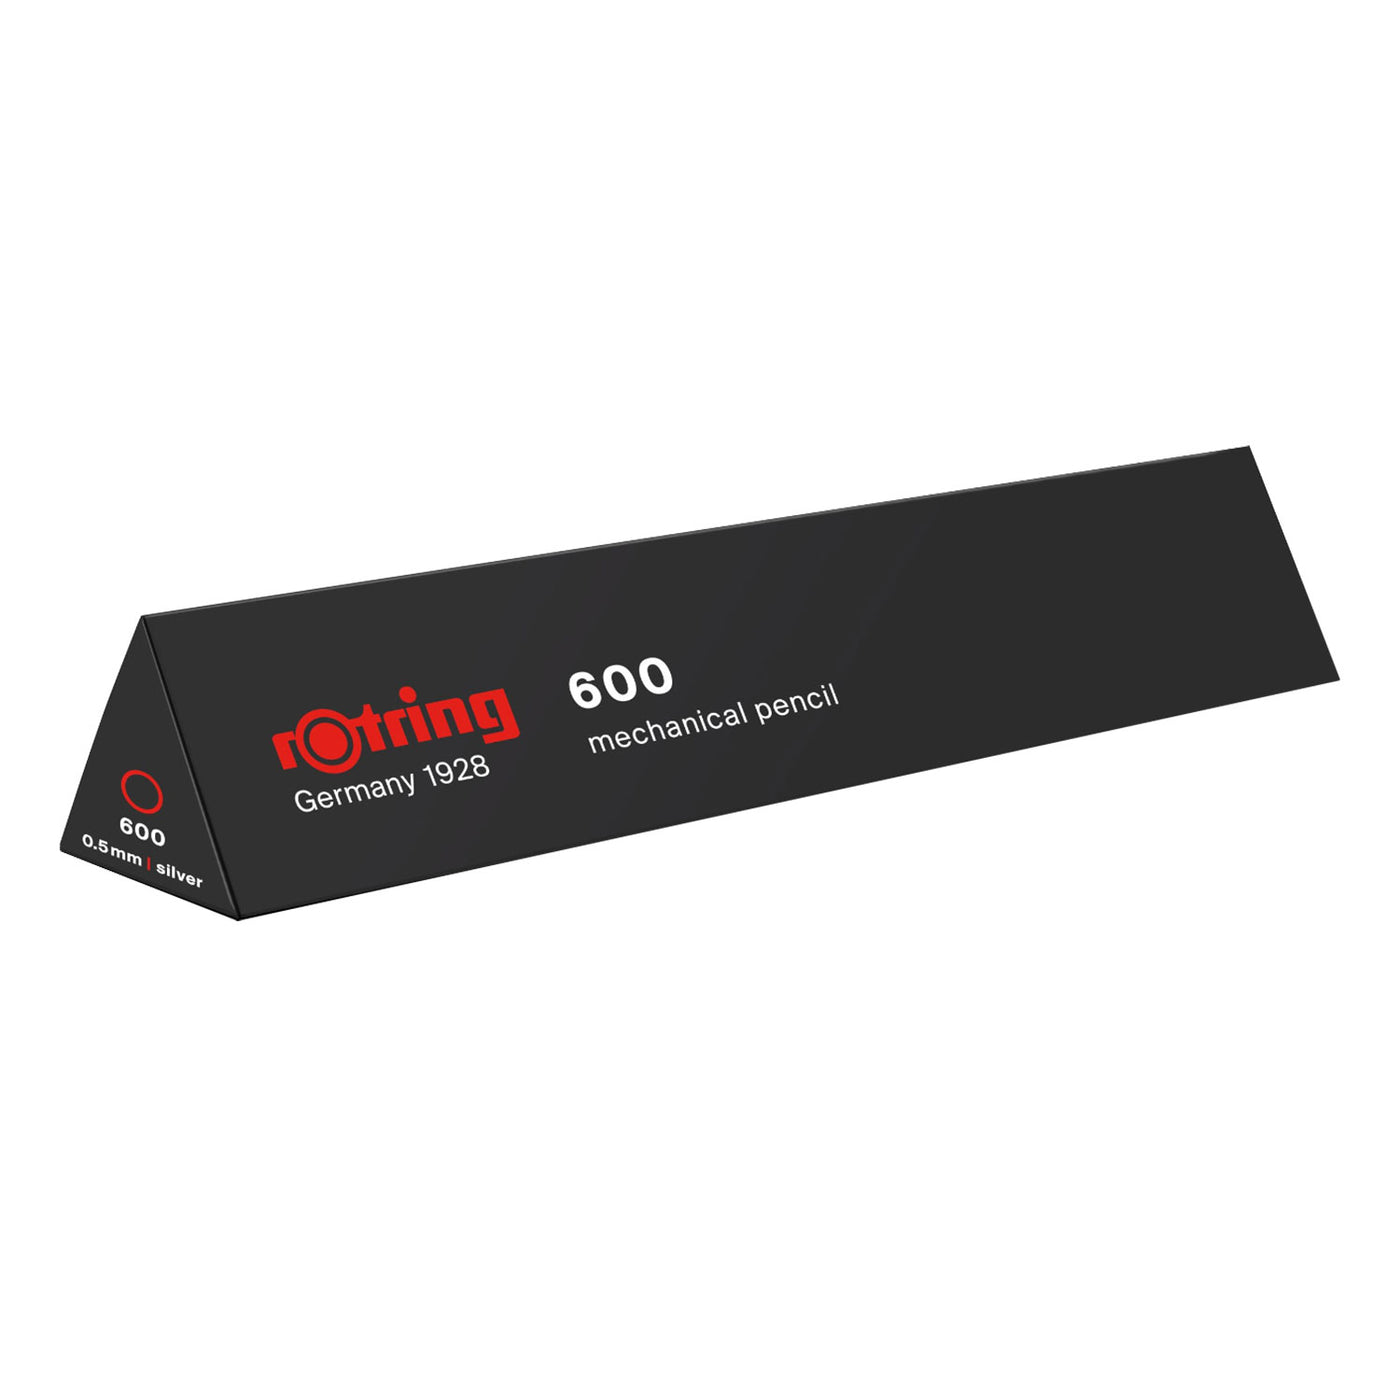 Rotring 600 0.5mm Mechanical Pencil - Silver 5